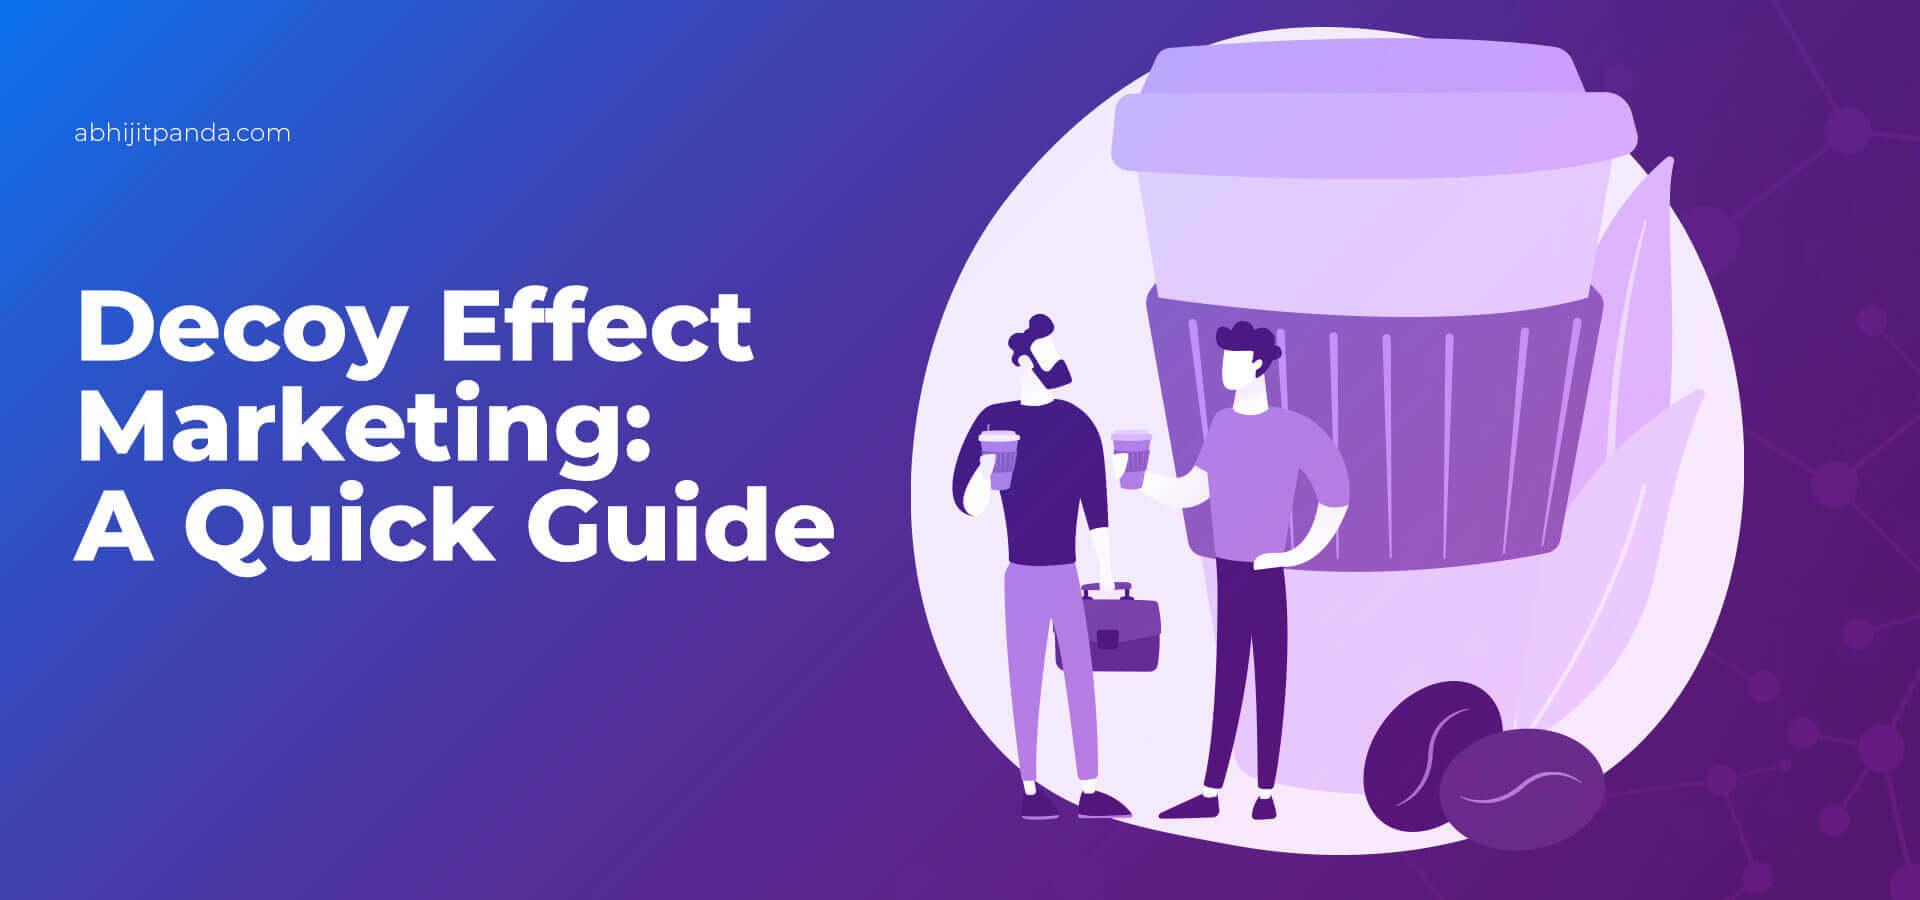 Decoy Effect Marketing - A Quick Guide